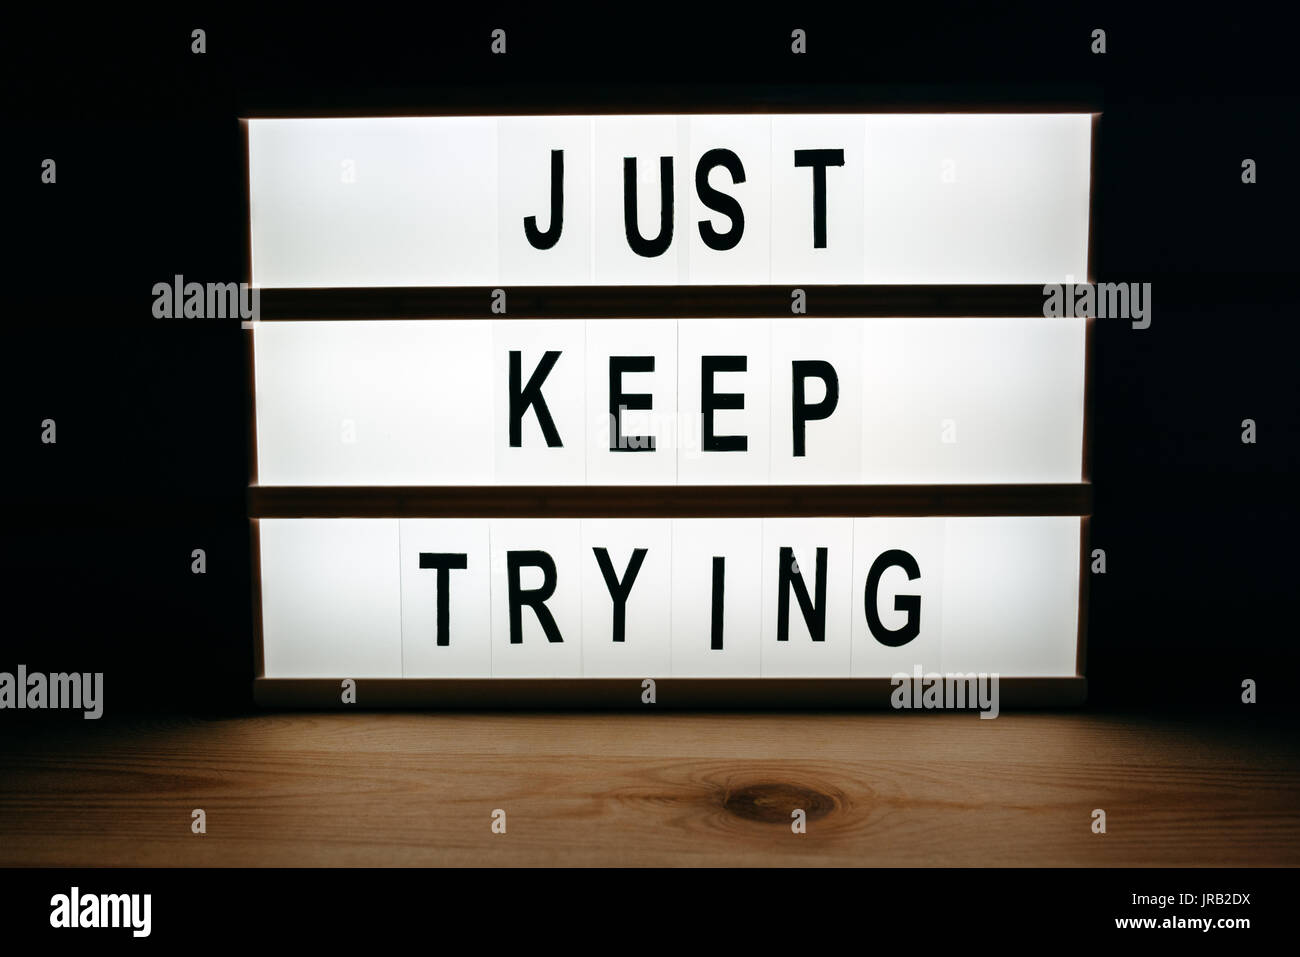 Just keep trying, motivational message on lightbox Stock Photo